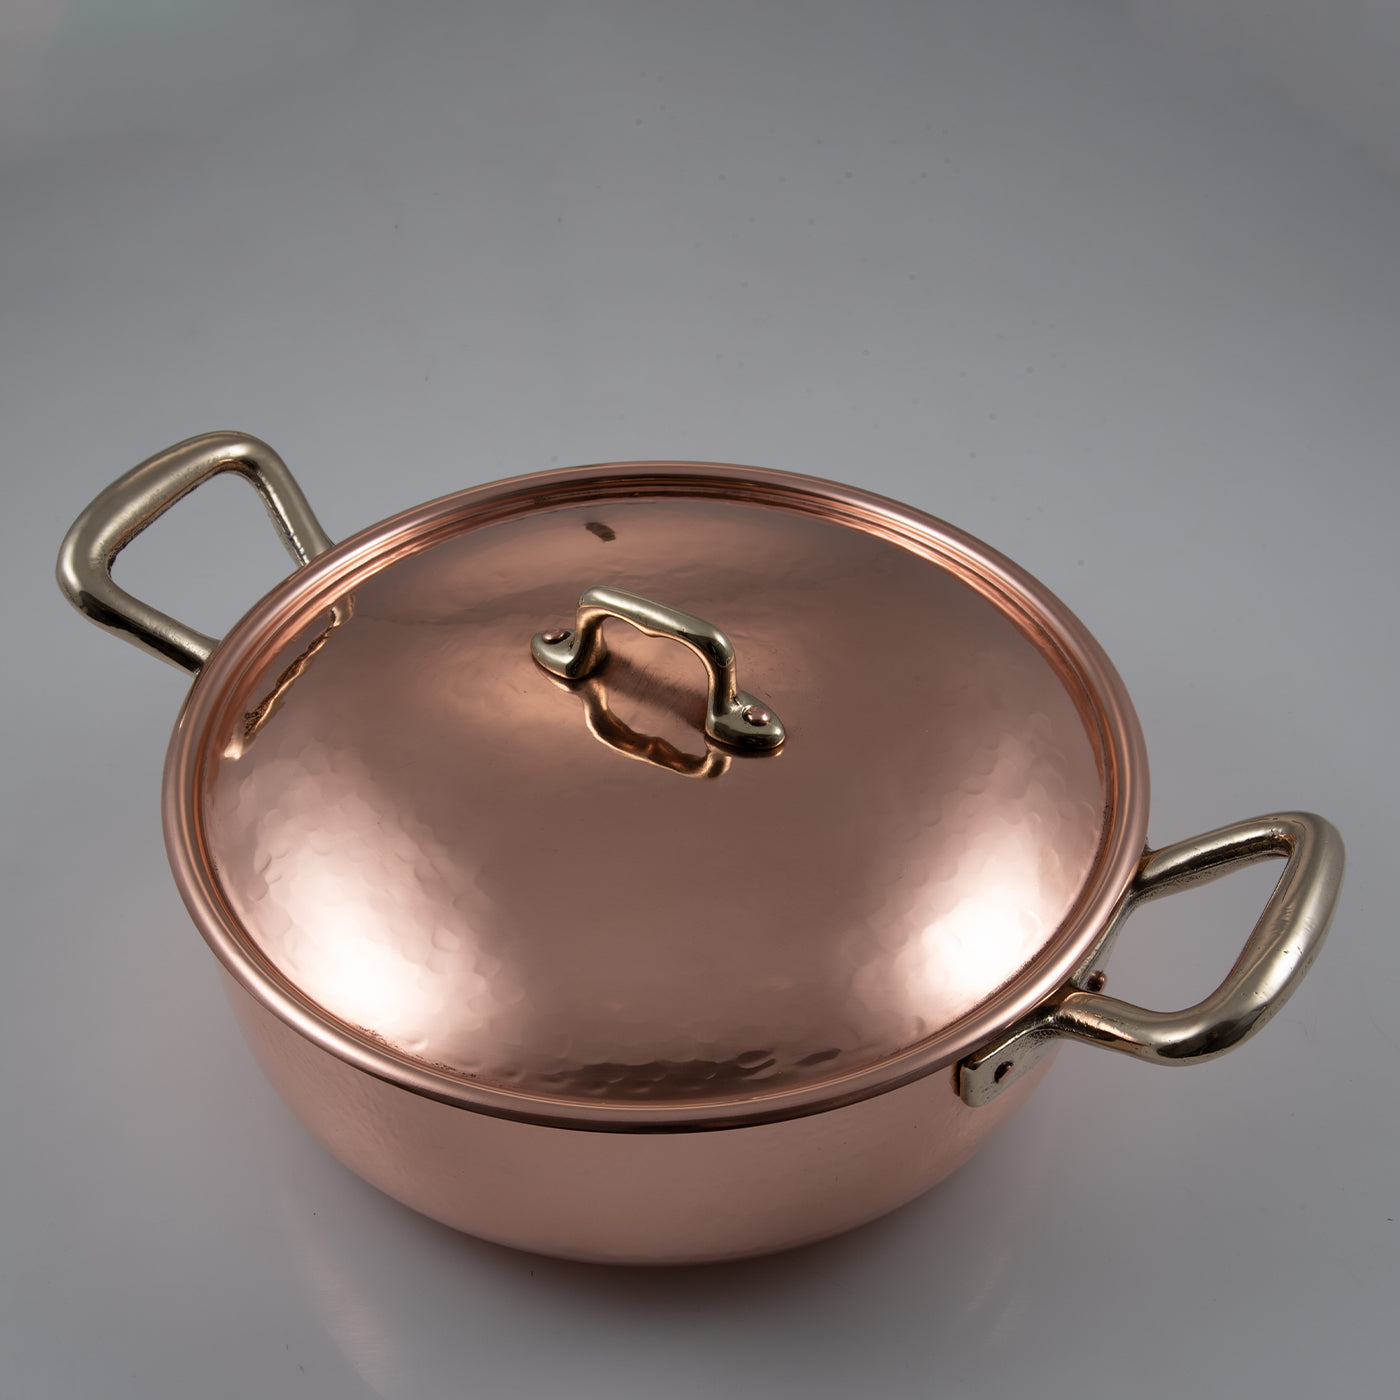 Silver lined 2-Handle Copper Pot with Lid #2 - Alternative view 2